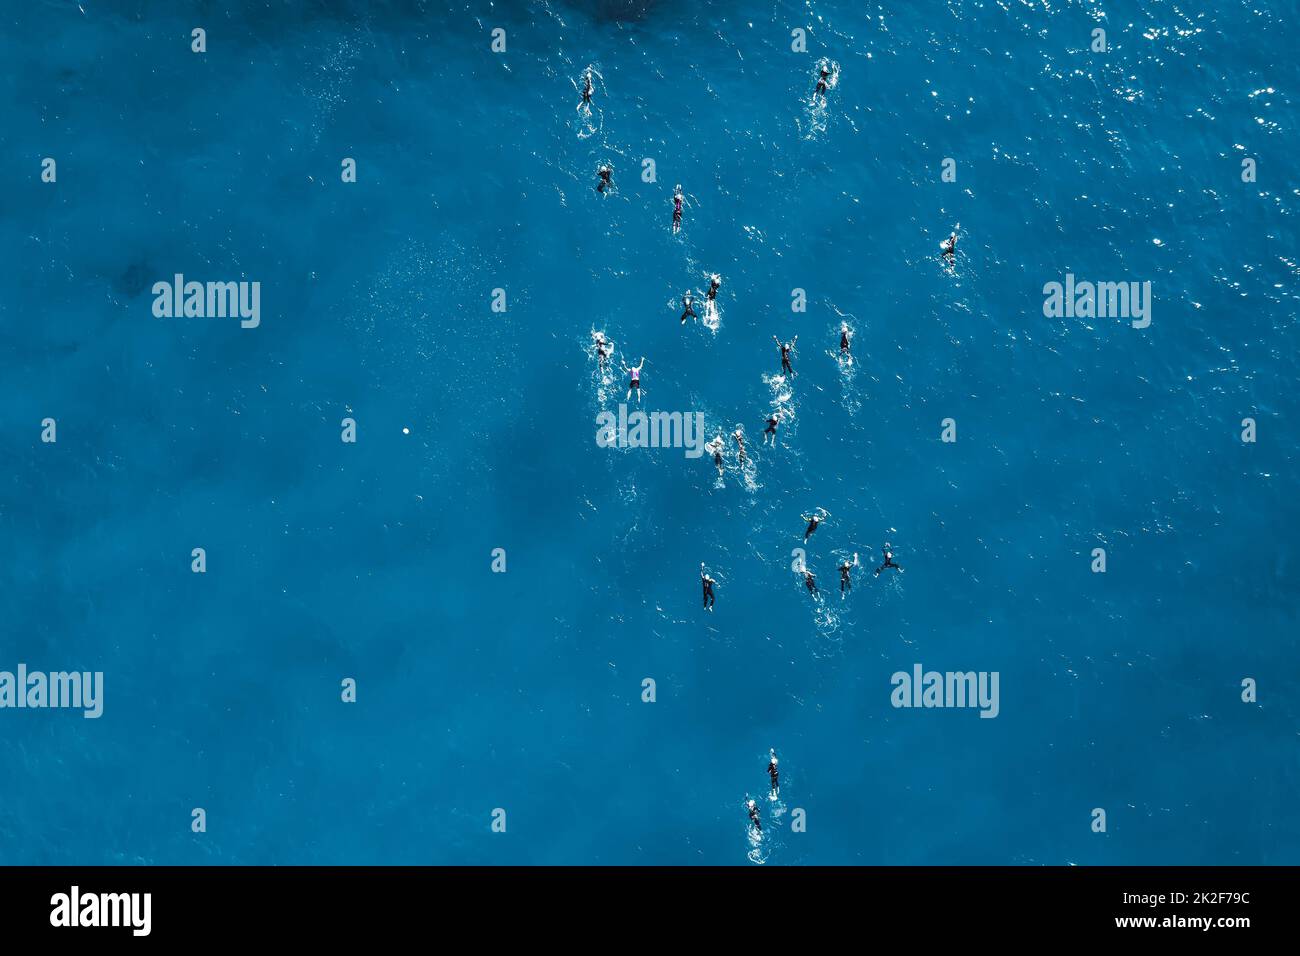 Topdown view of swimmers during open water competition Stock Photo